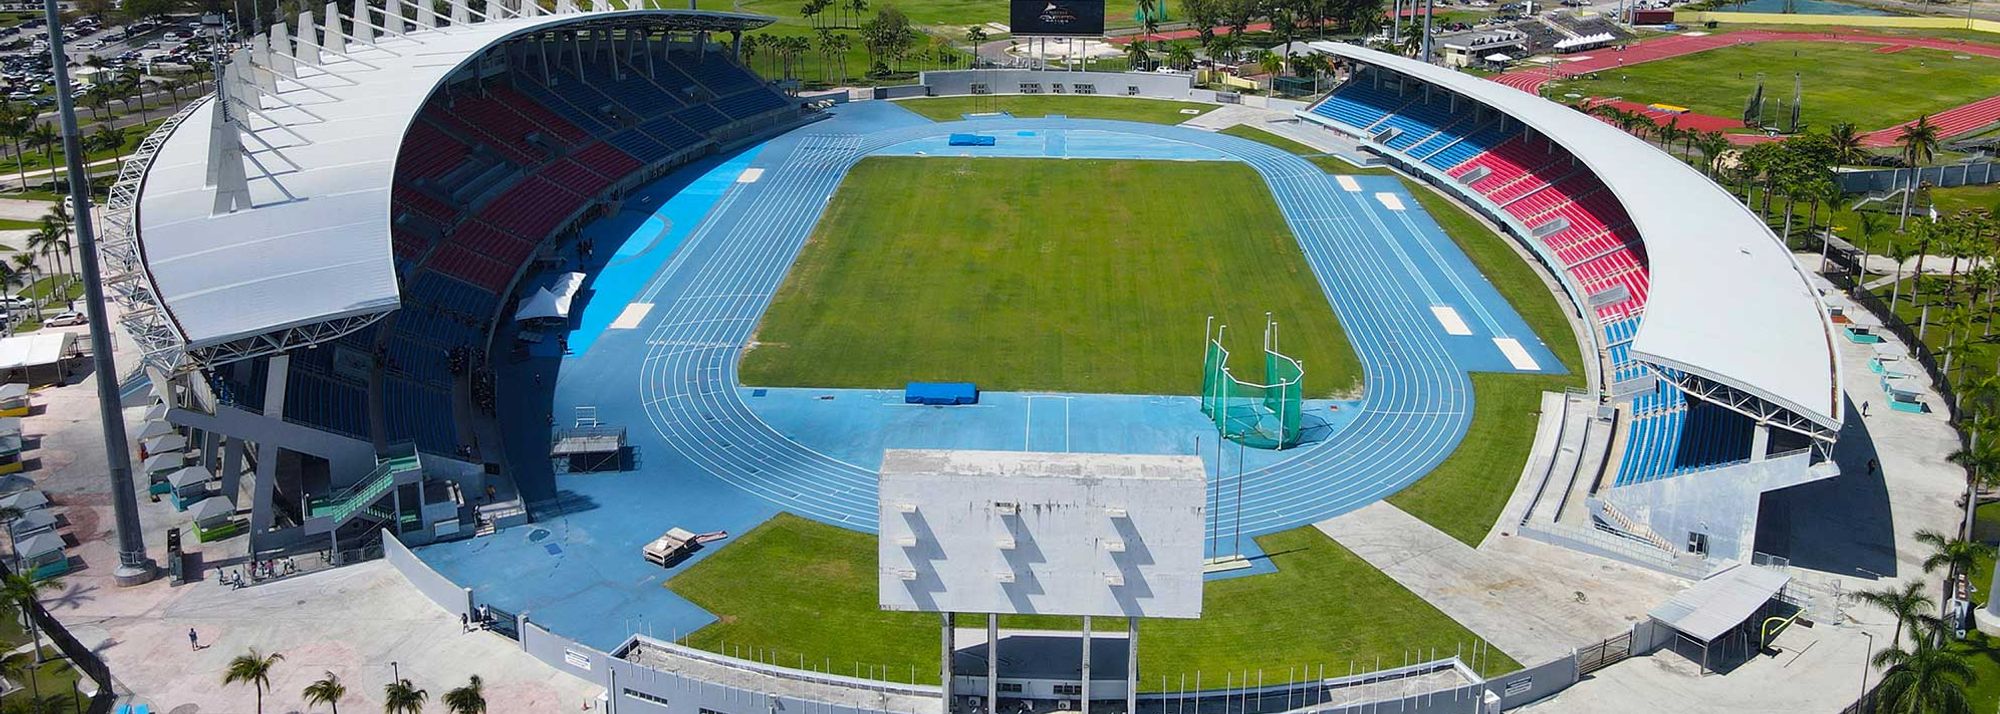 The stage is being set for the sixth edition of the World Athletics Relays, which will be held 4-5 May in Nassau, The Bahamas, at the Thomas A Robinson National Stadium. 